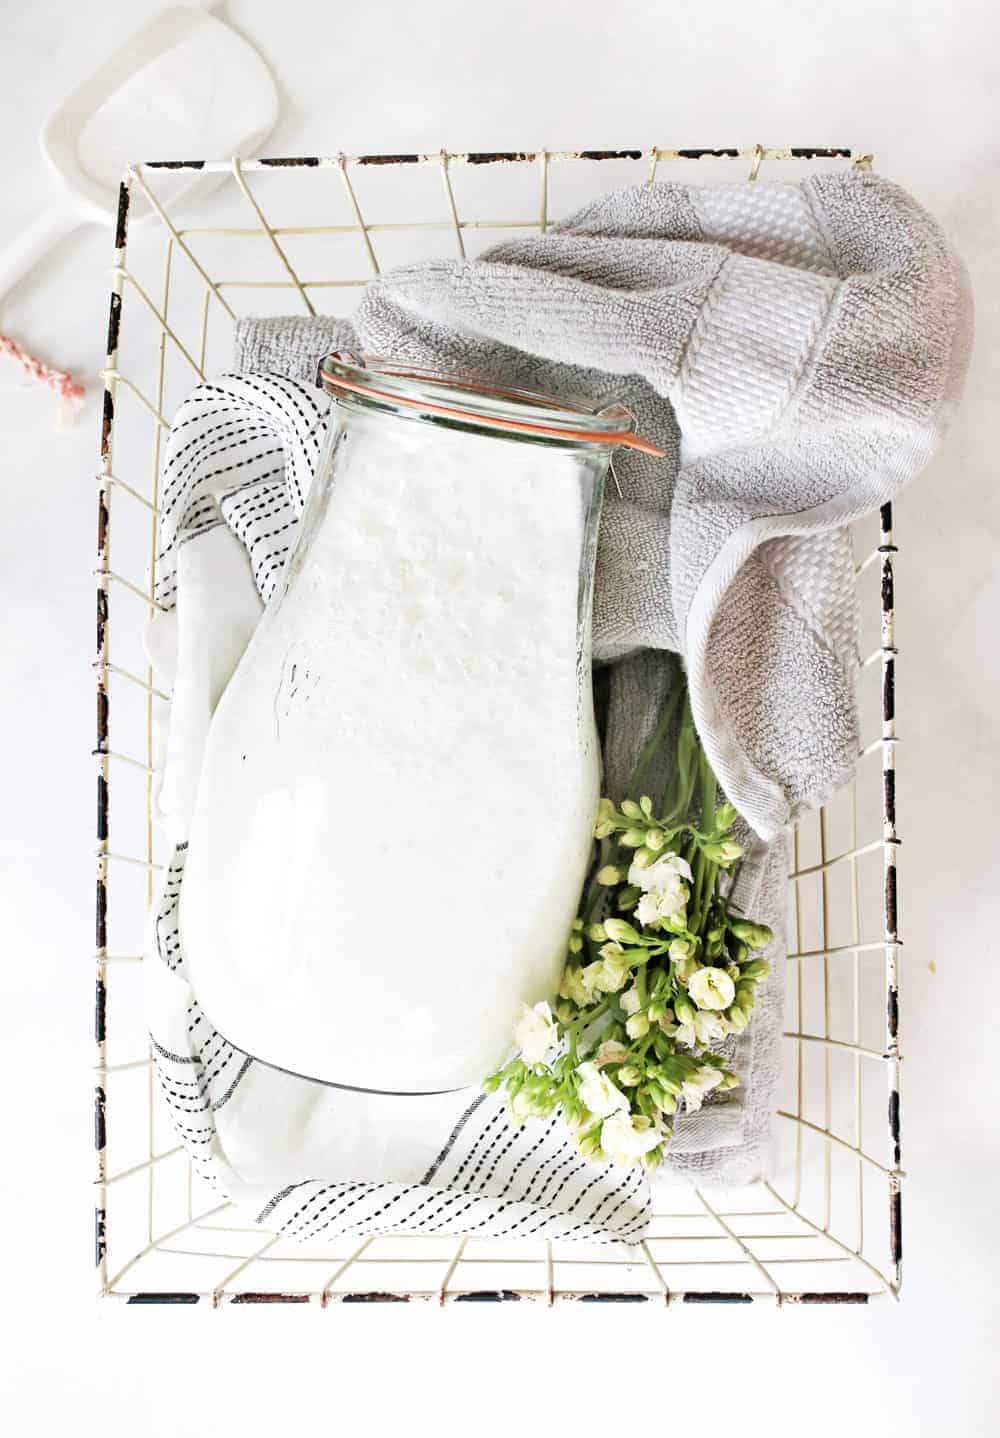 A Completely Natural Laundry Detergent You Can Make Yourself